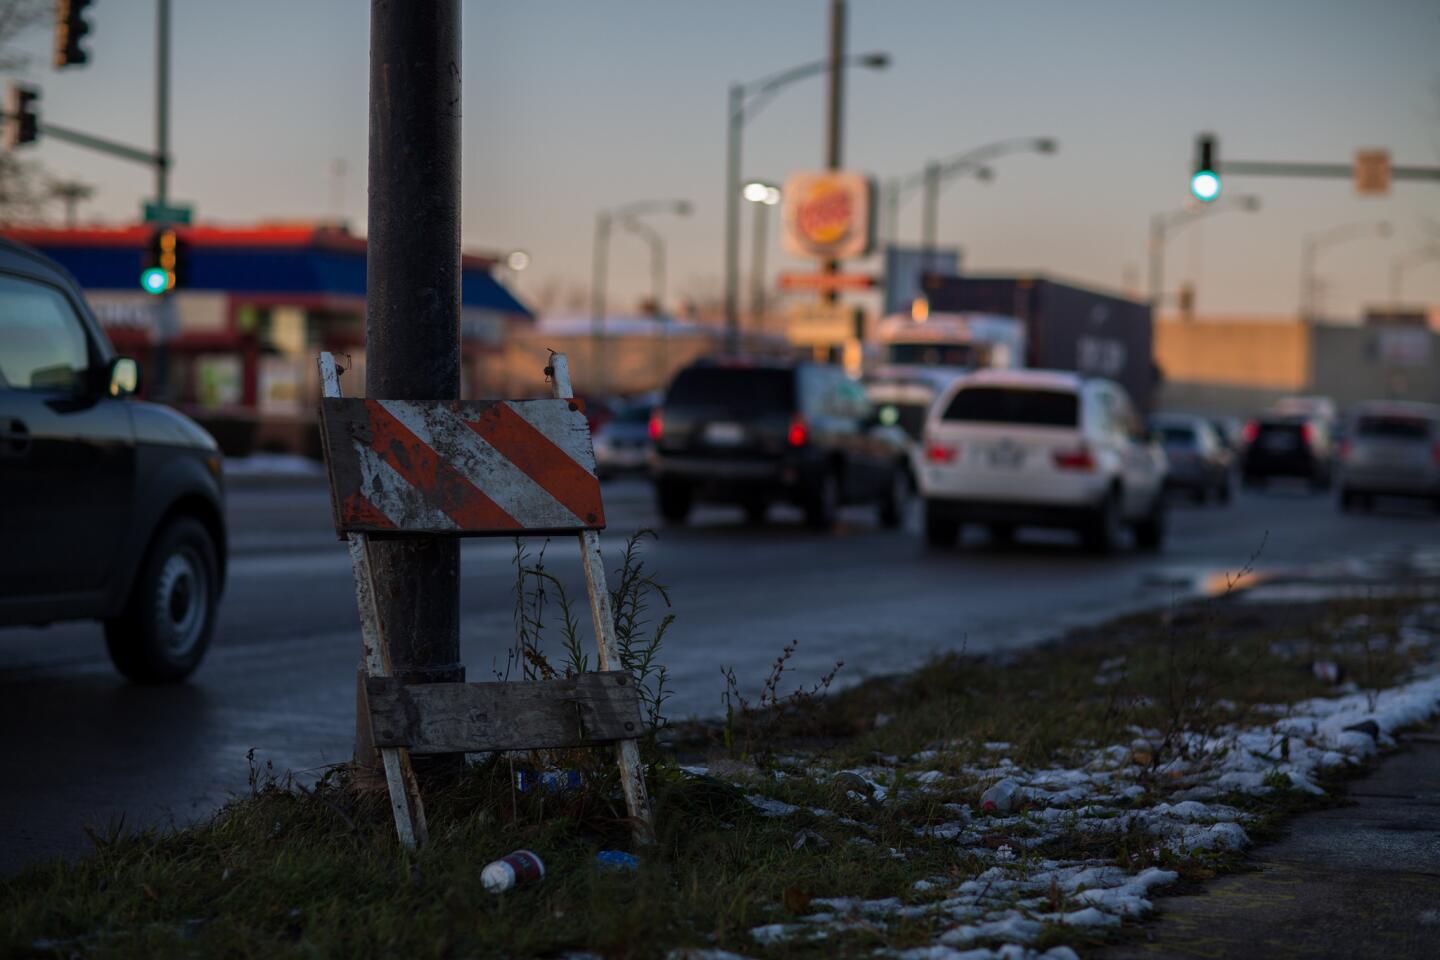 The site where Laquan McDonald, 17, was killed on the 4100 block of South Pulaski Road in Chicago. McDonald was shot 16 times by Chicago police Officer Jason Van Dyke in October 2014.